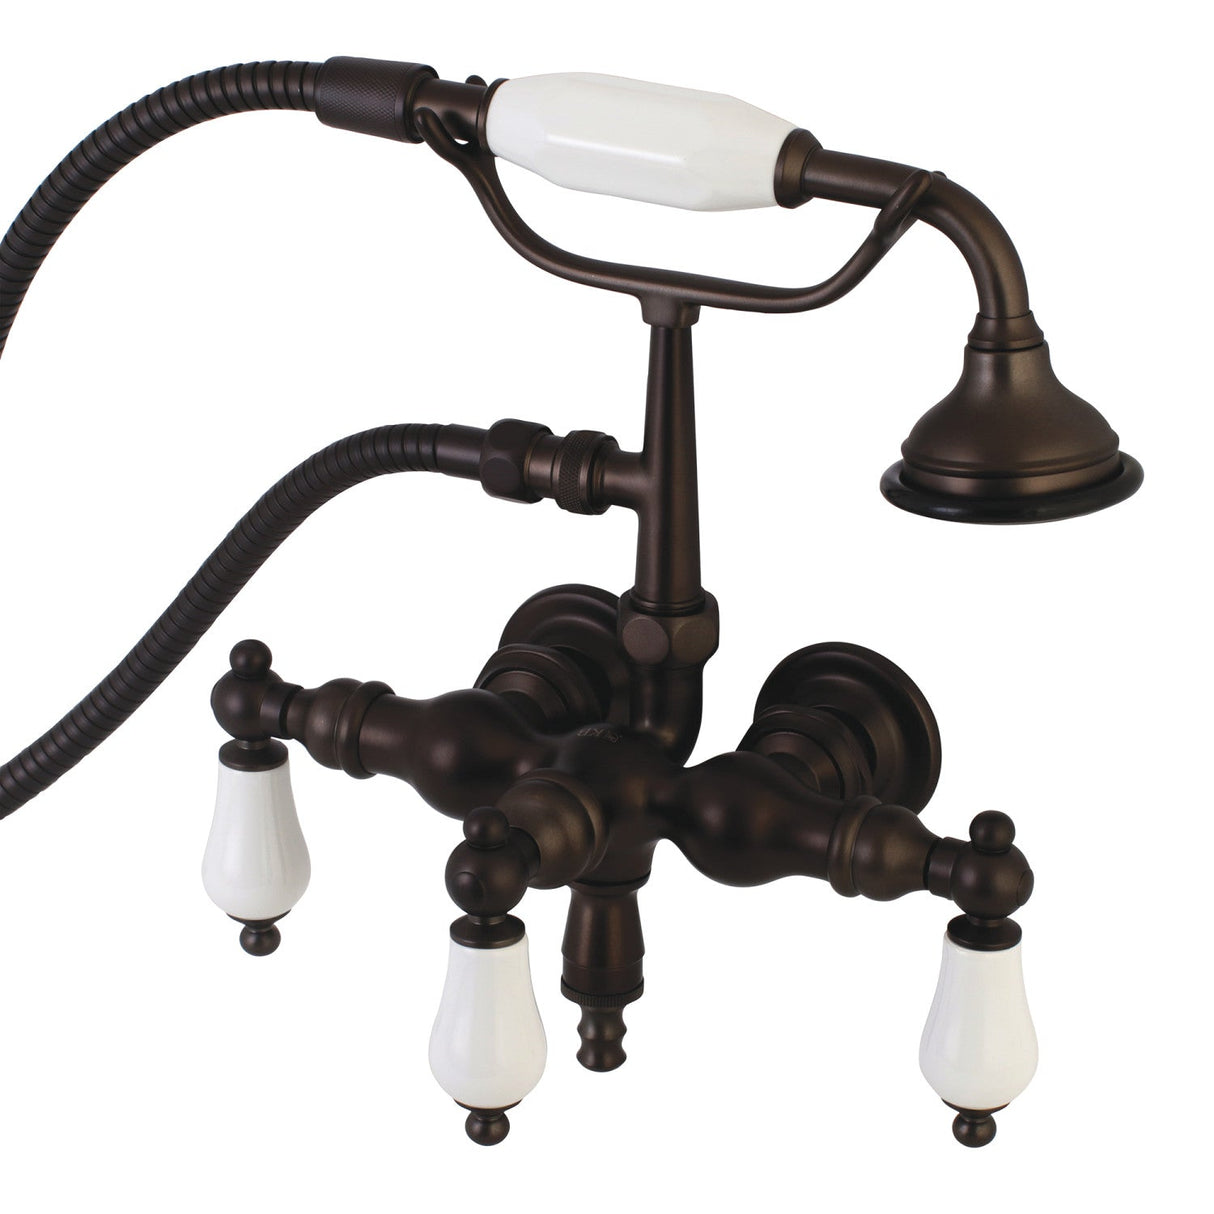 Aqua Vintage AE23T5 Three-Handle 2-Hole Tub Wall Mount Clawfoot Tub Faucet with Hand Shower, Oil Rubbed Bronze